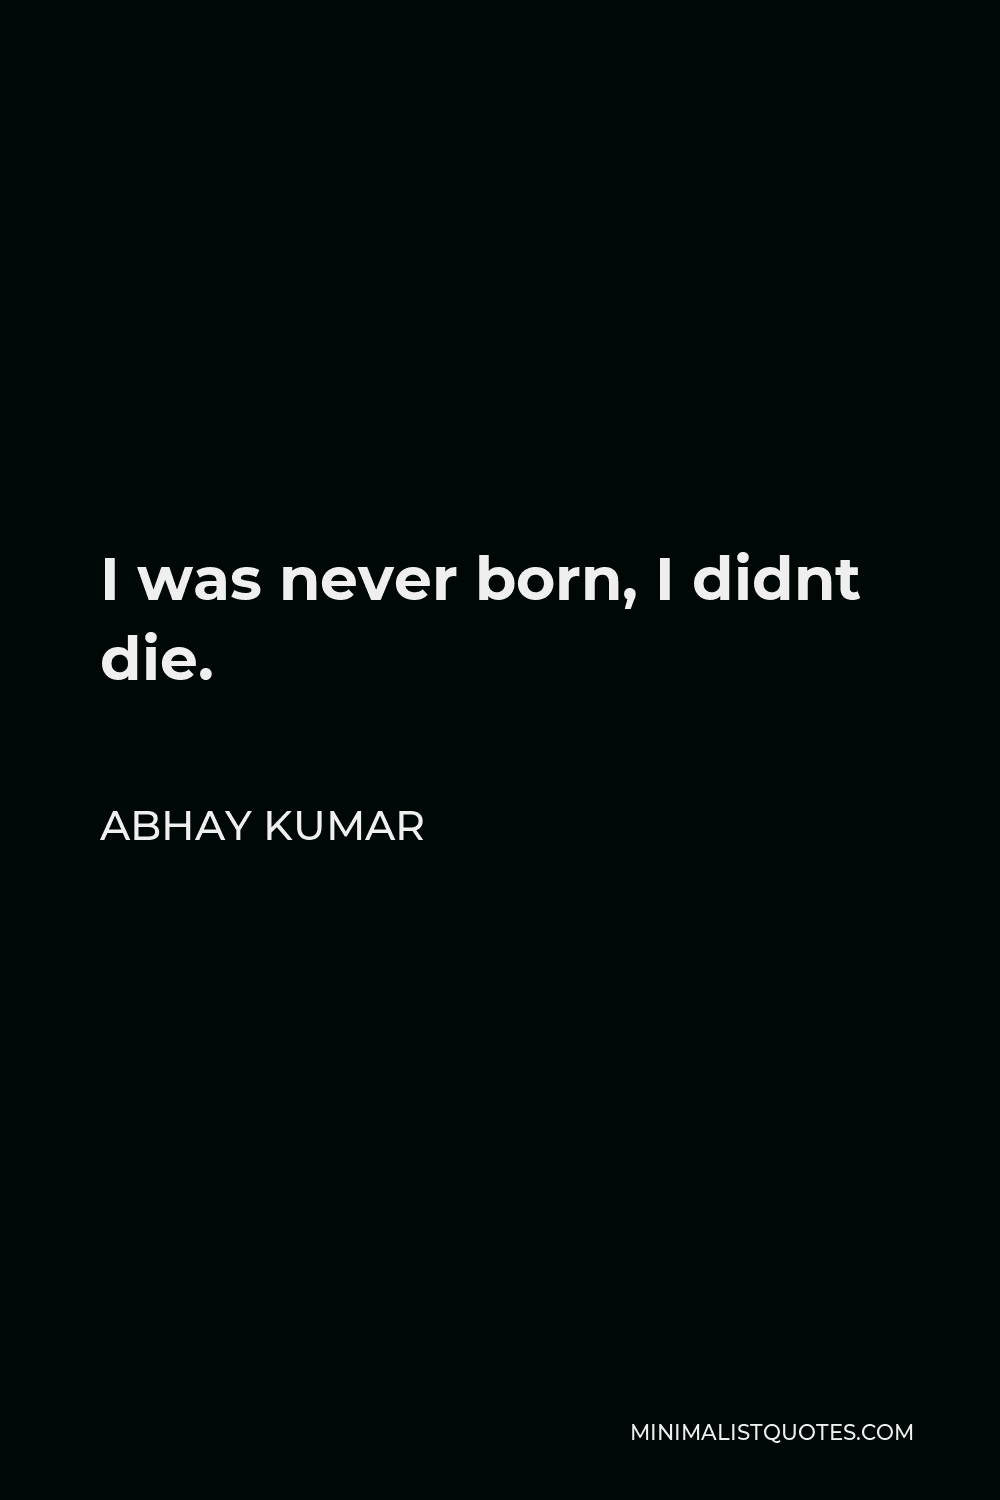 Abhay Kumar Quote - I was never born, I didnt die.